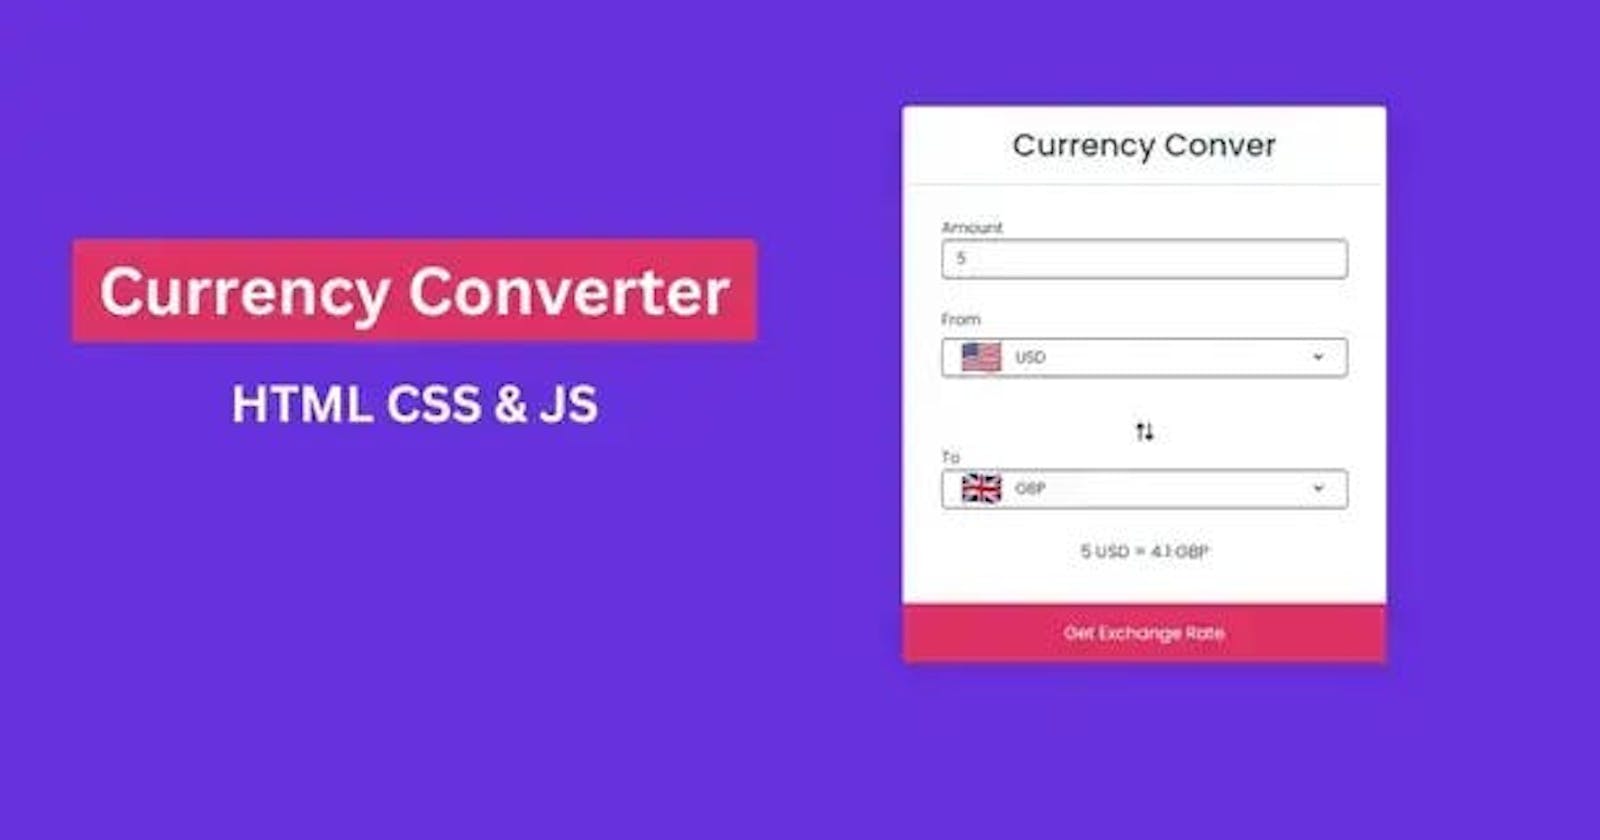 Currency Converter App Using HTML CSS and Javascript